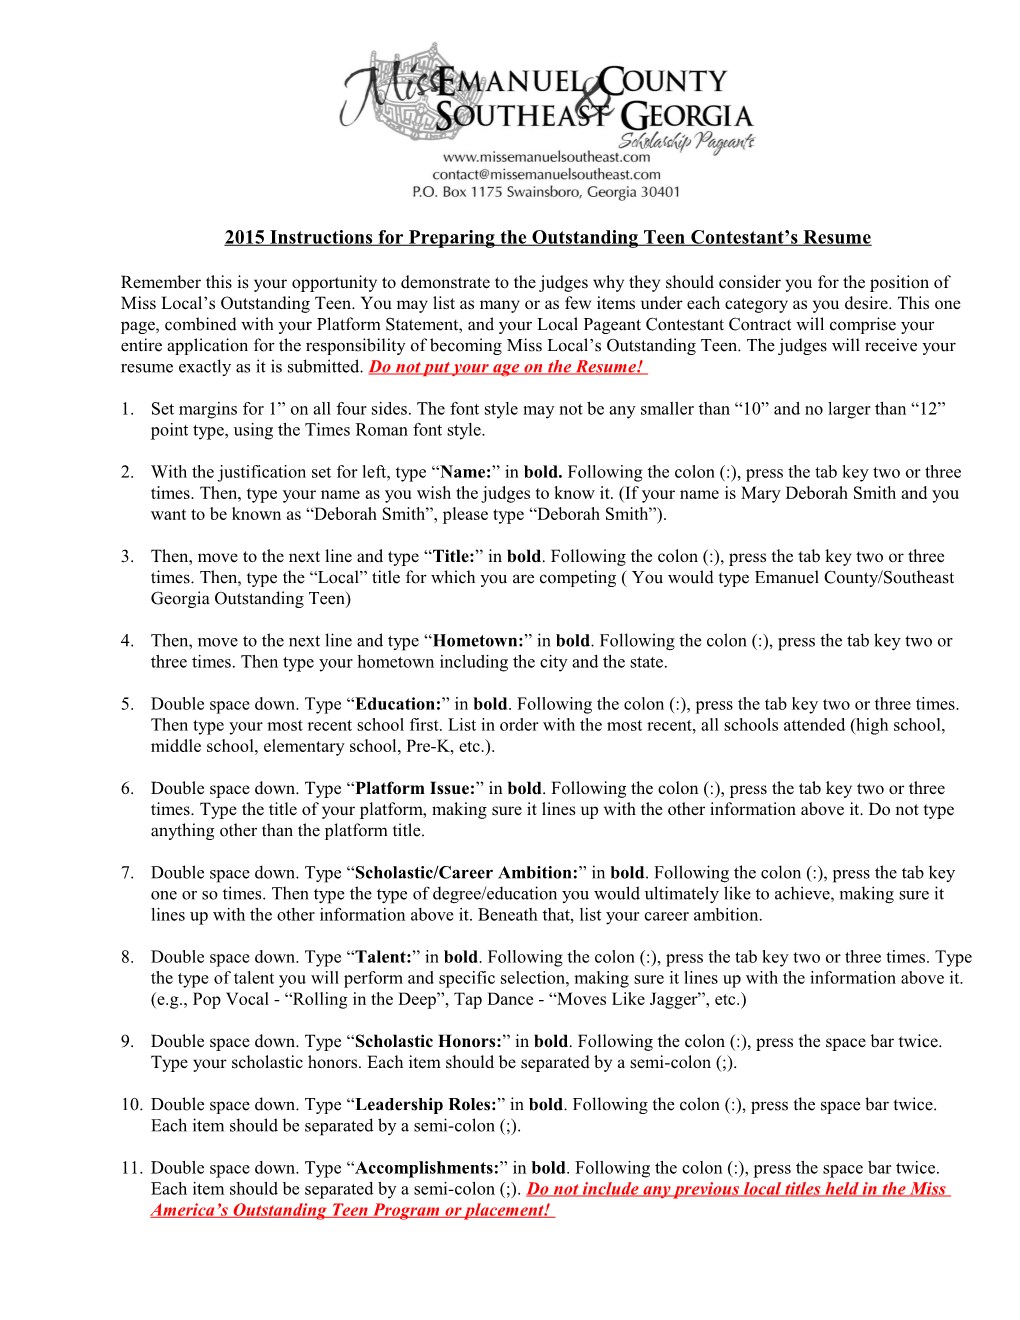 Instructions for Completing the Miss Georgia S Outstanding Teen Contestant S Resume